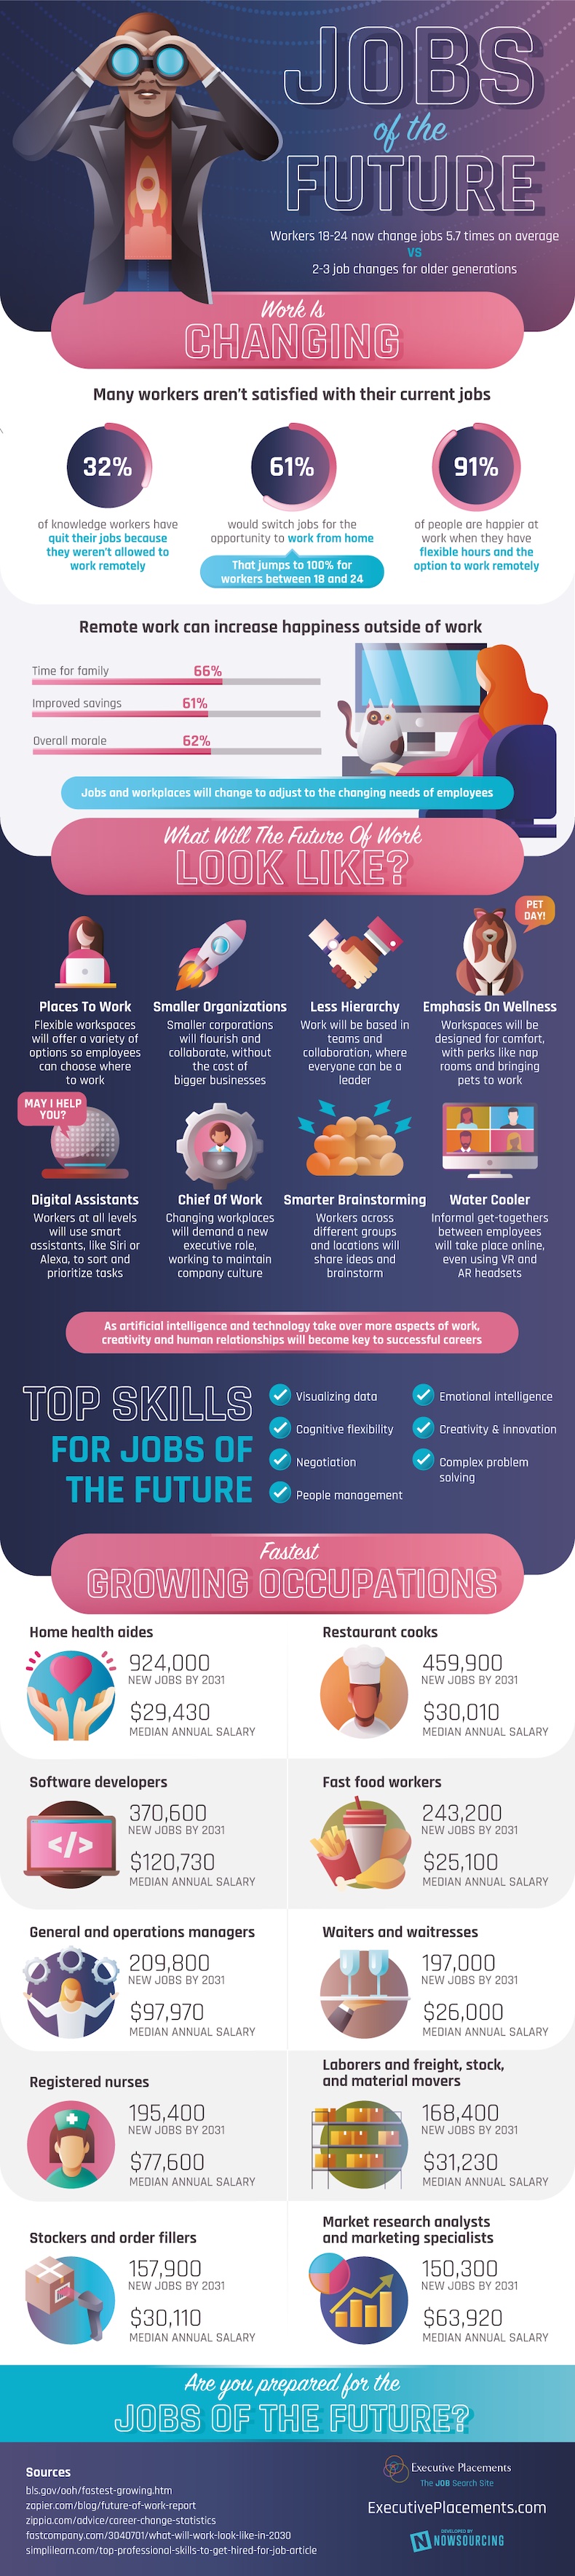 Jobs of the future infographic